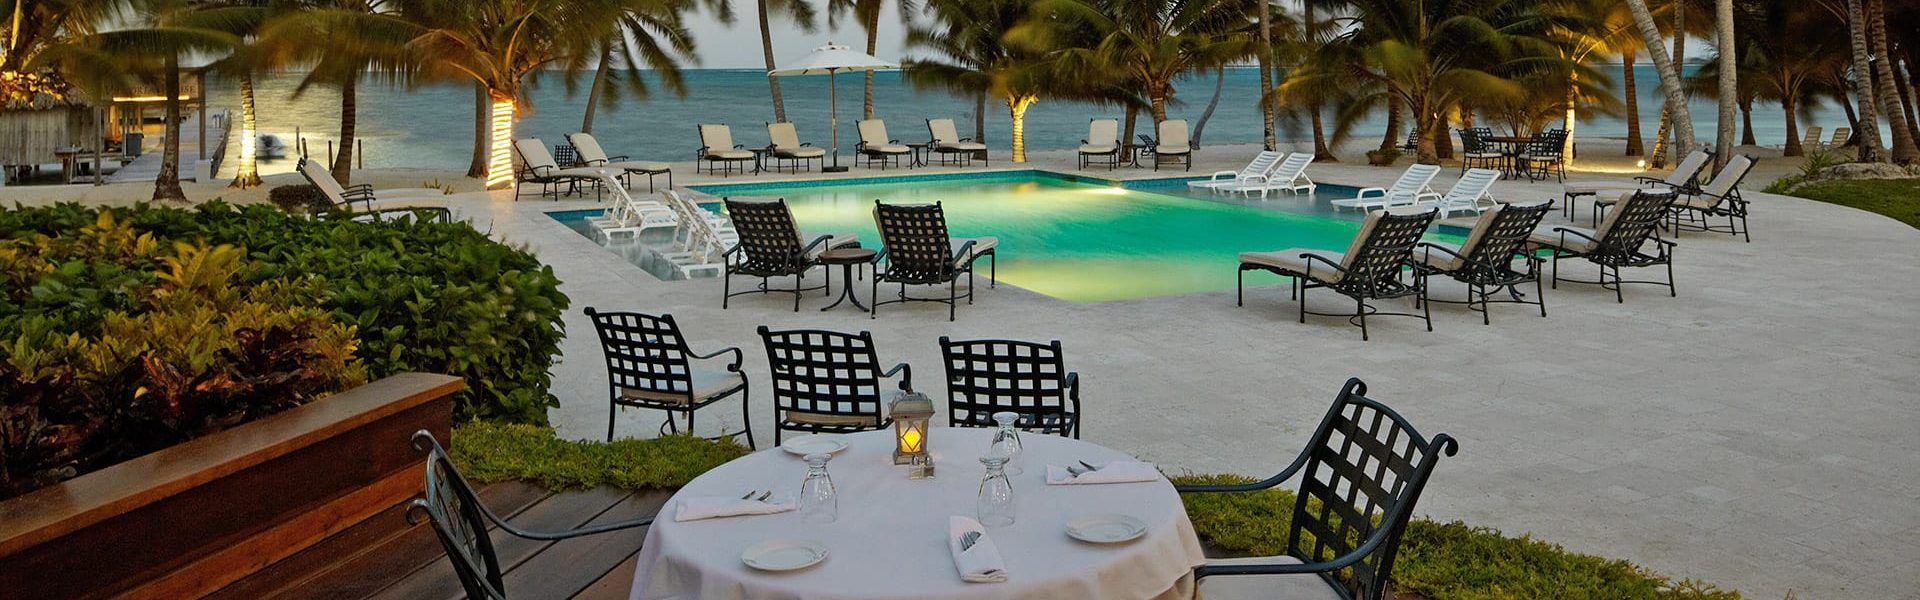 Dining table poolside at Victoria House Resort and Spa, Belize